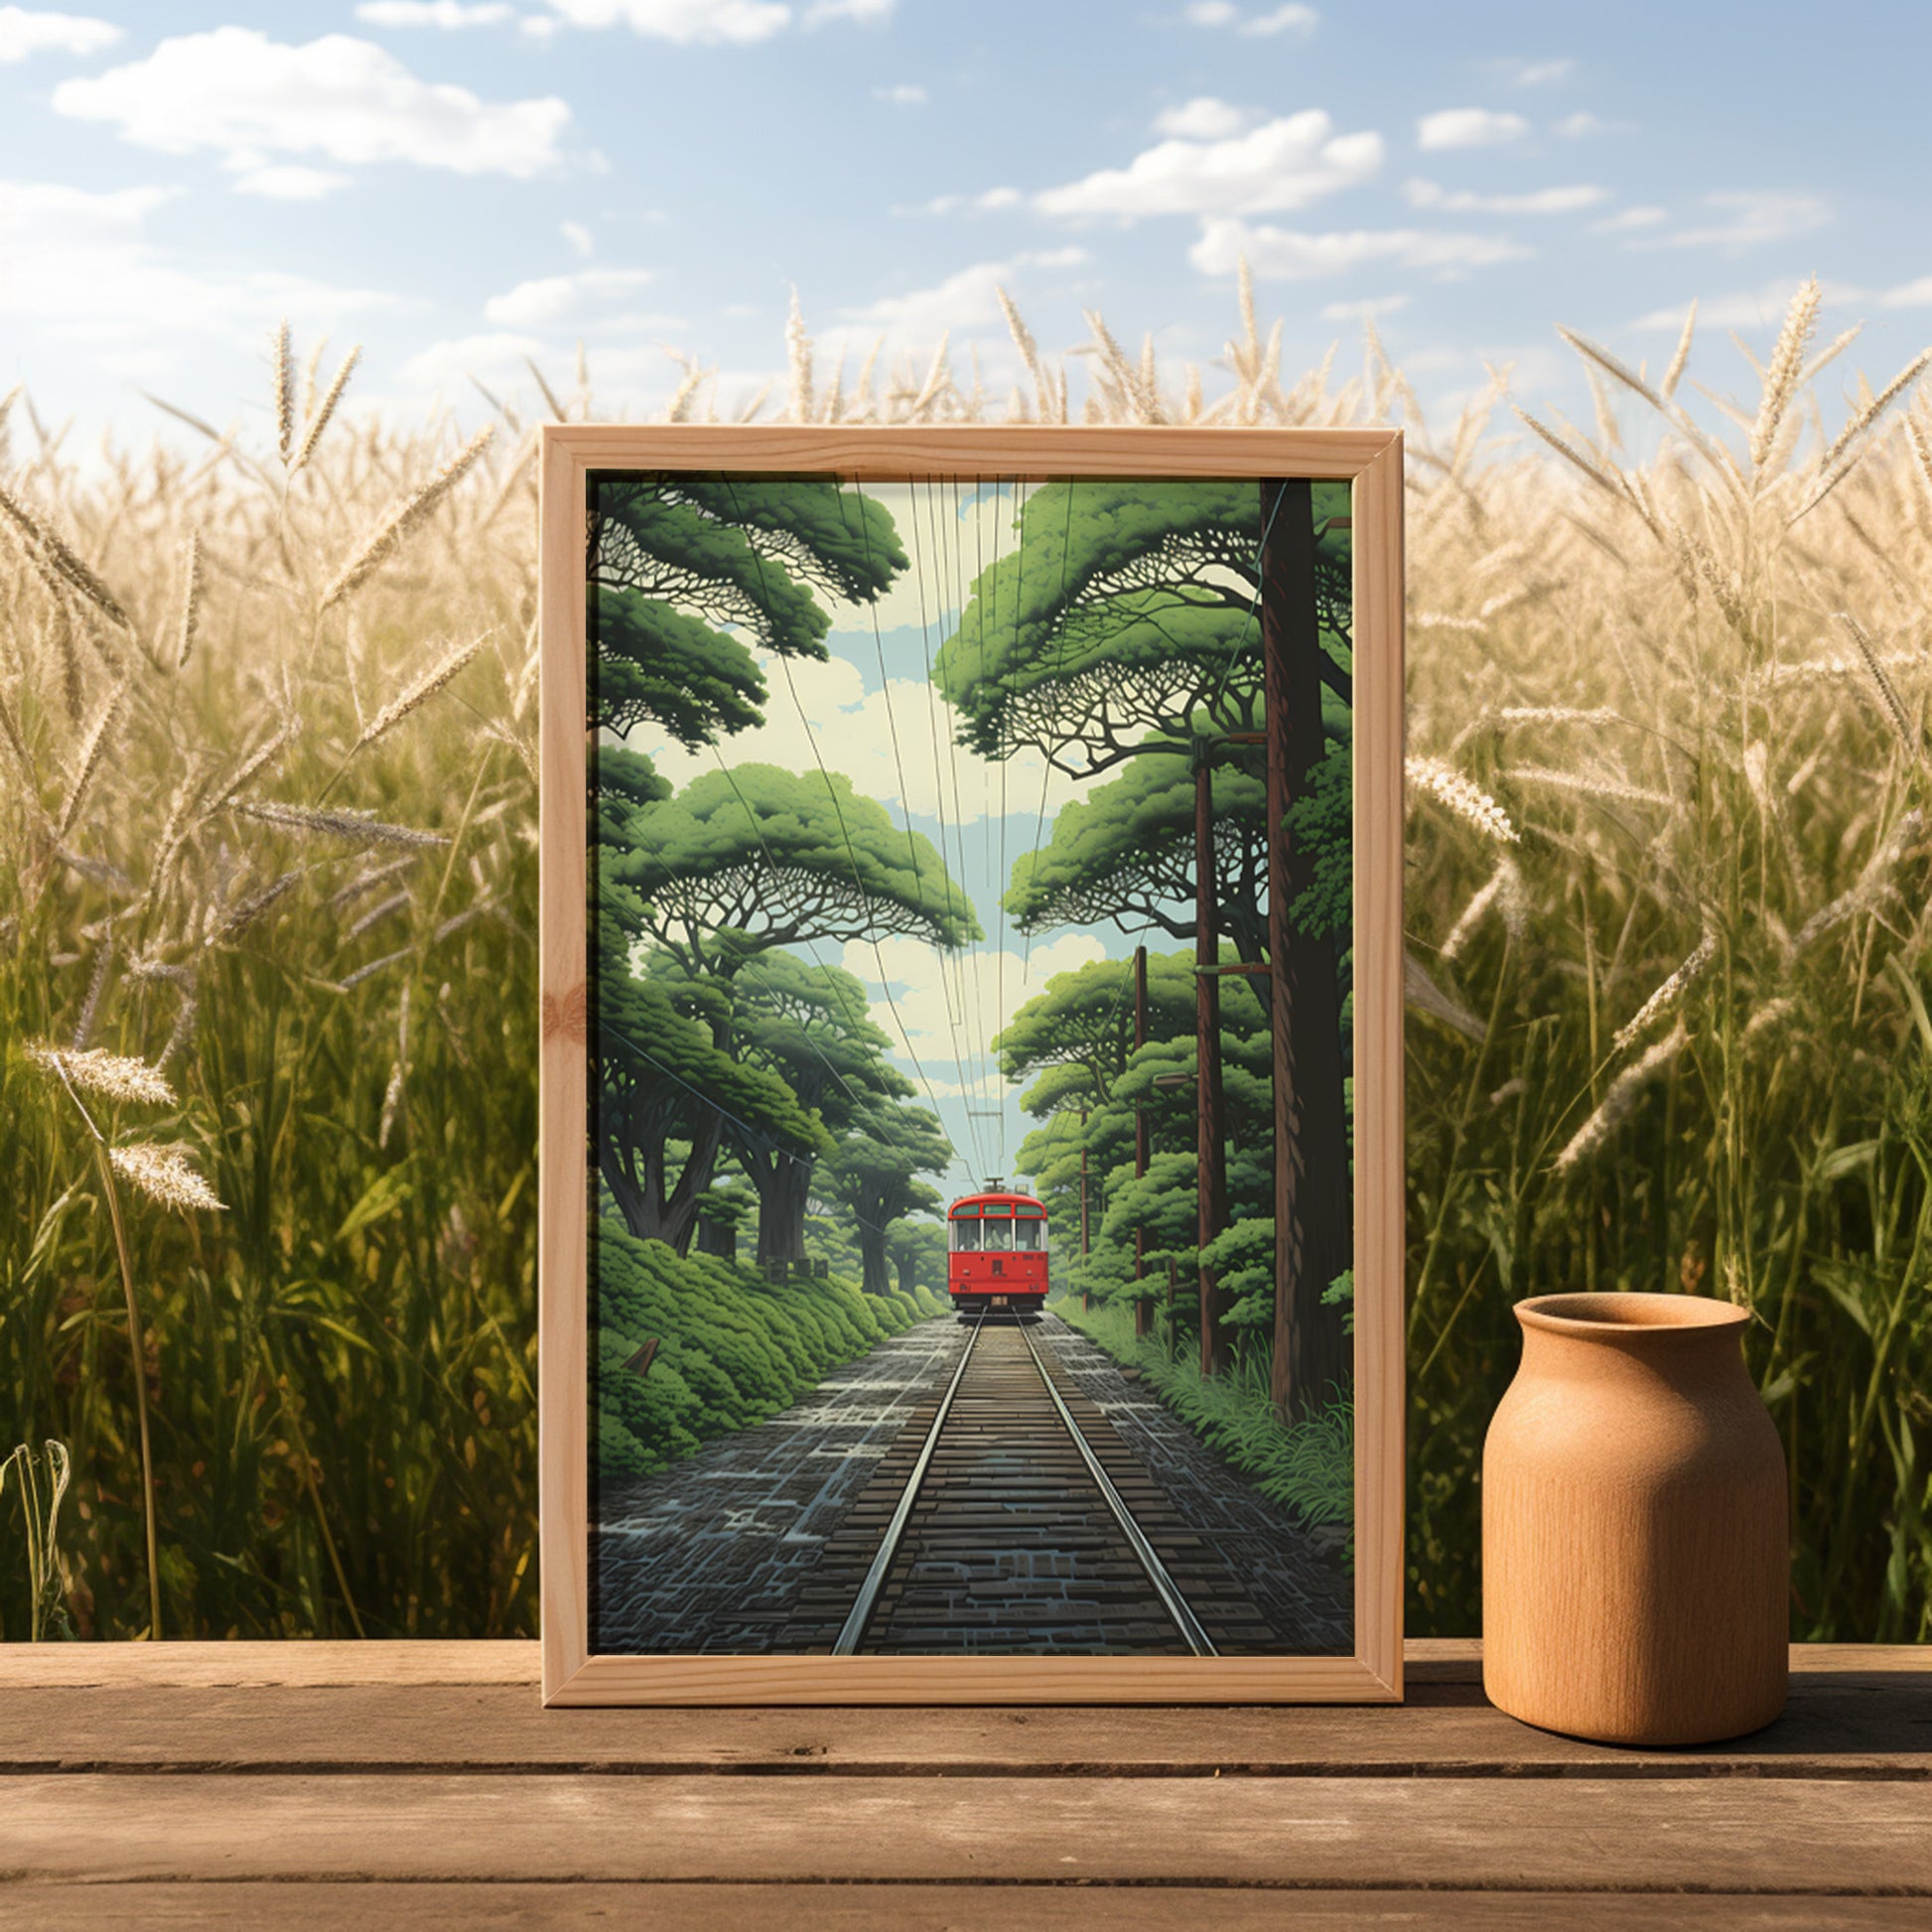 A framed picture of a train on tracks in a forest, placed on a wooden surface beside a clay pot, with tall grass in the background.